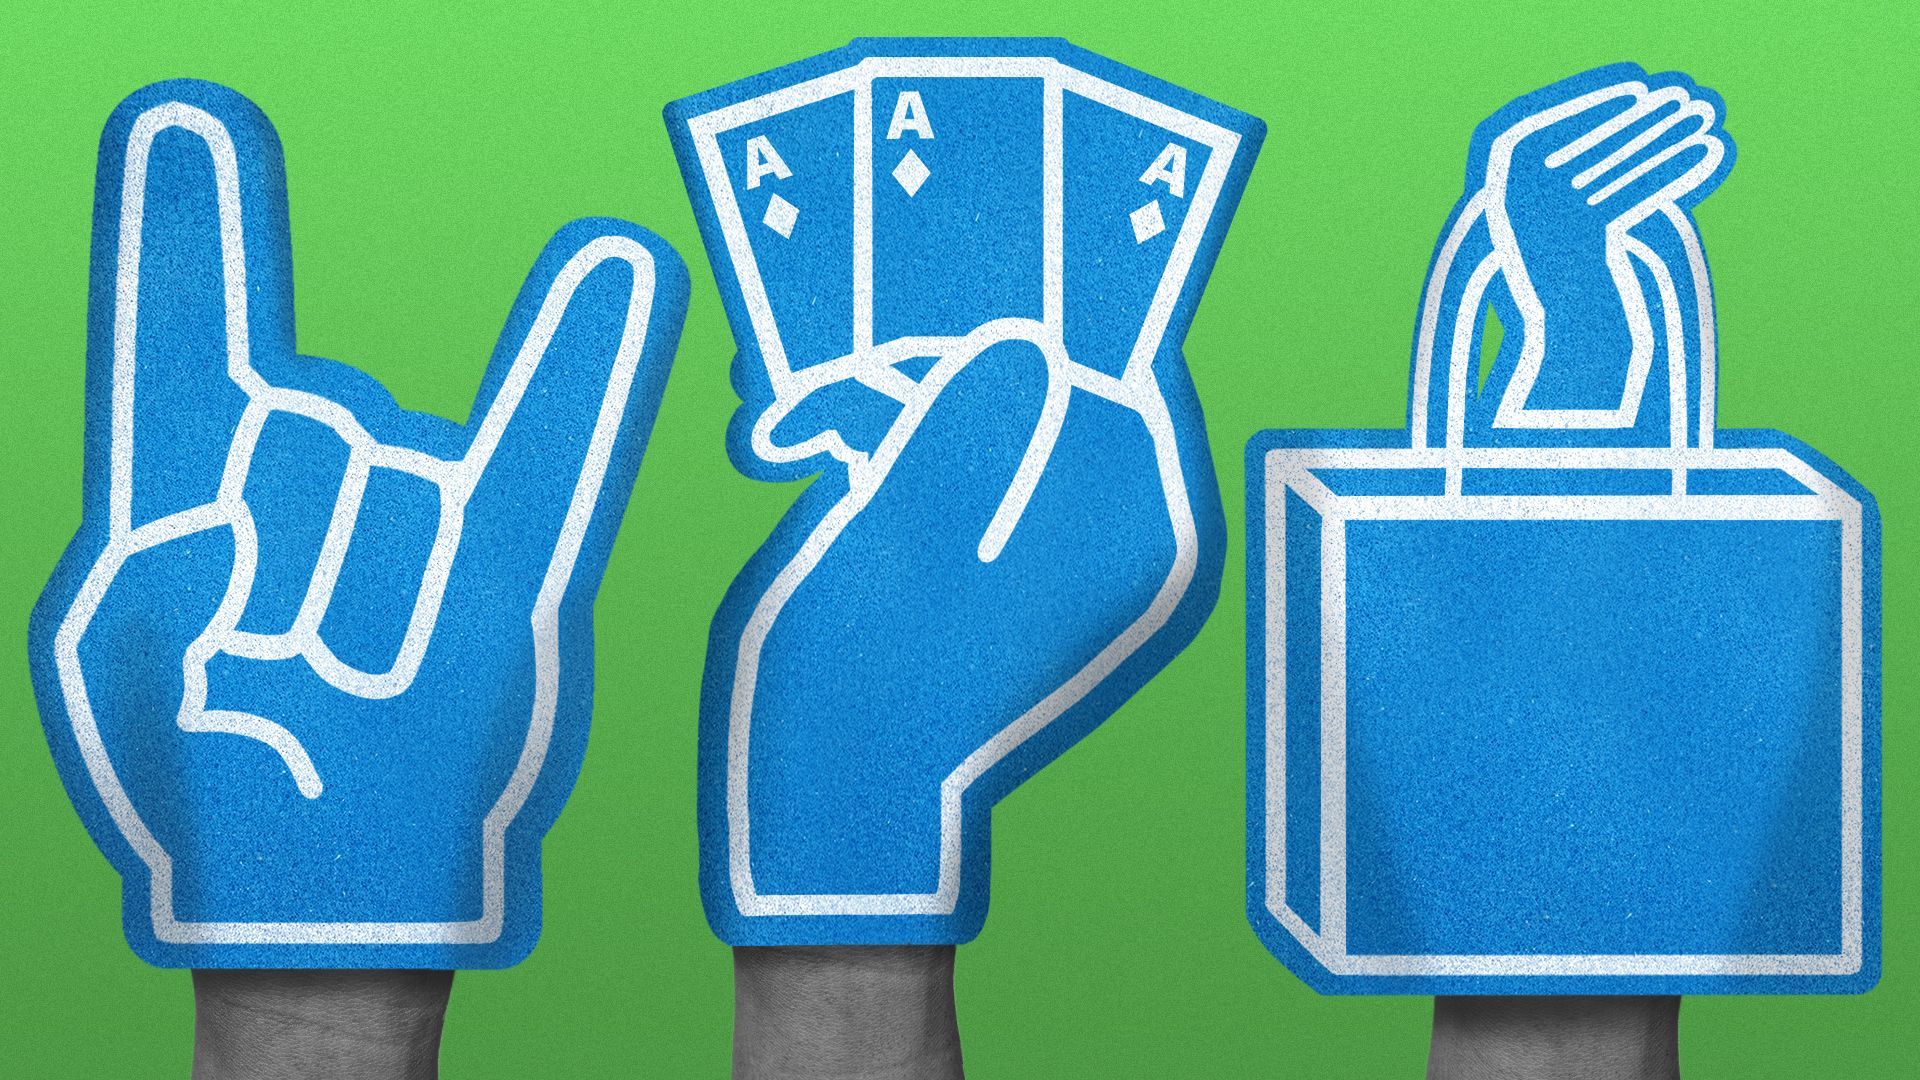 Illustration of three foam fingers: one with a rock hand sign, one holding playing cards and one holding a shopping bag.